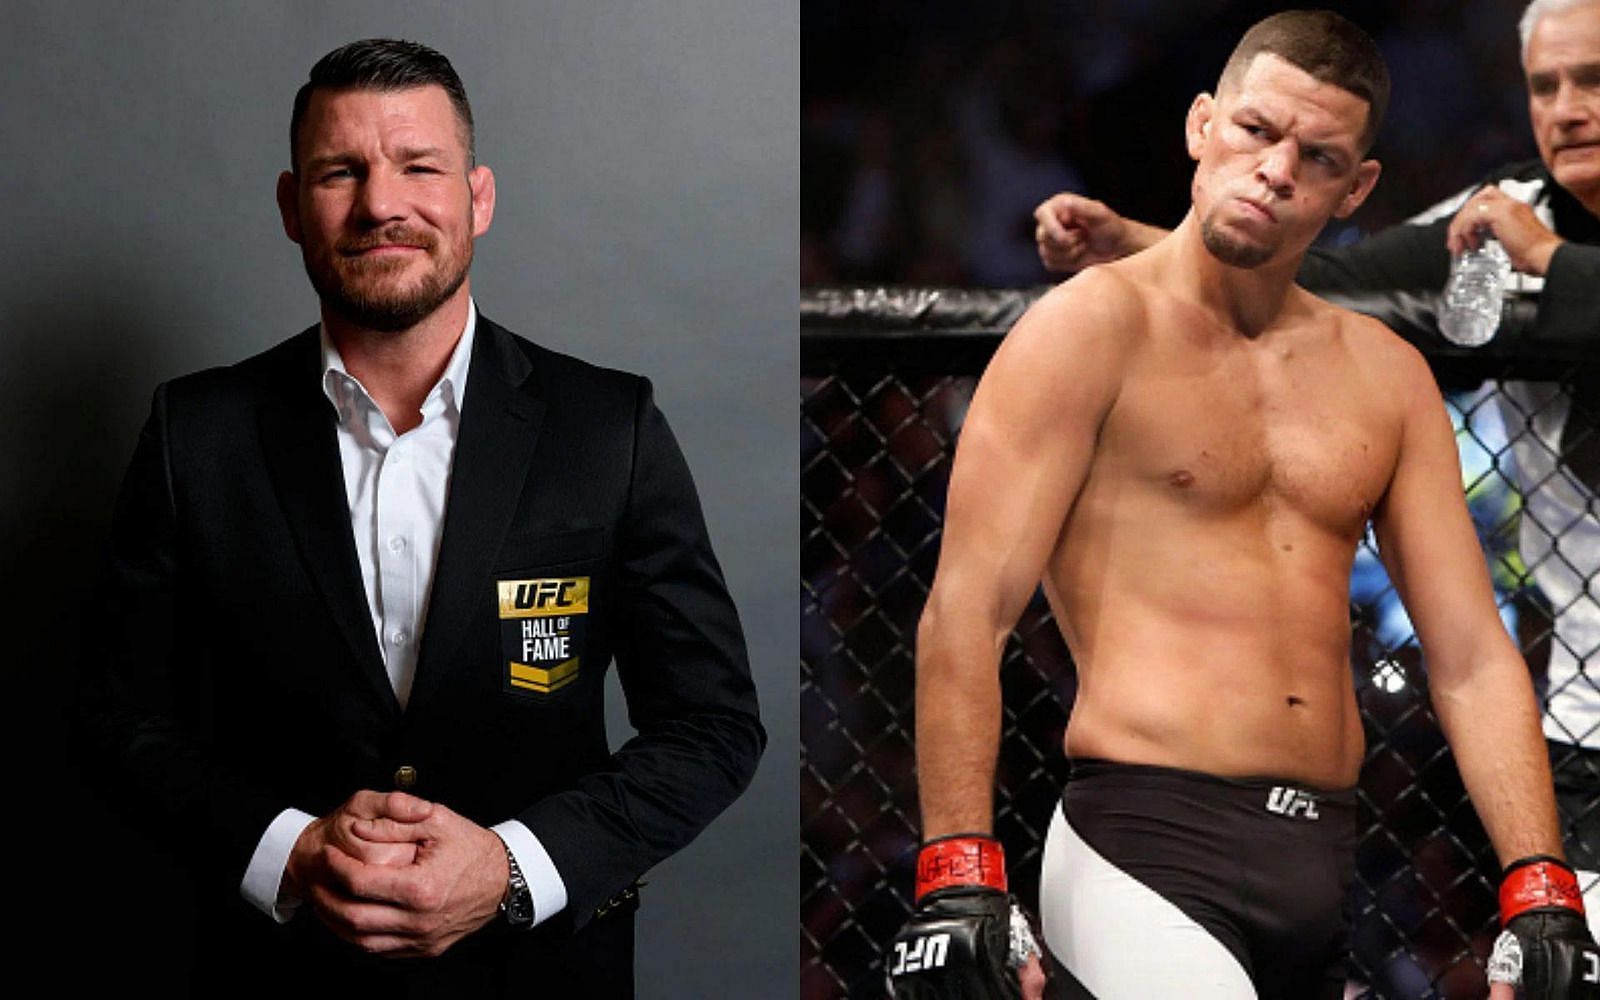 Michael Bisping (left) and Nate Diaz (right)